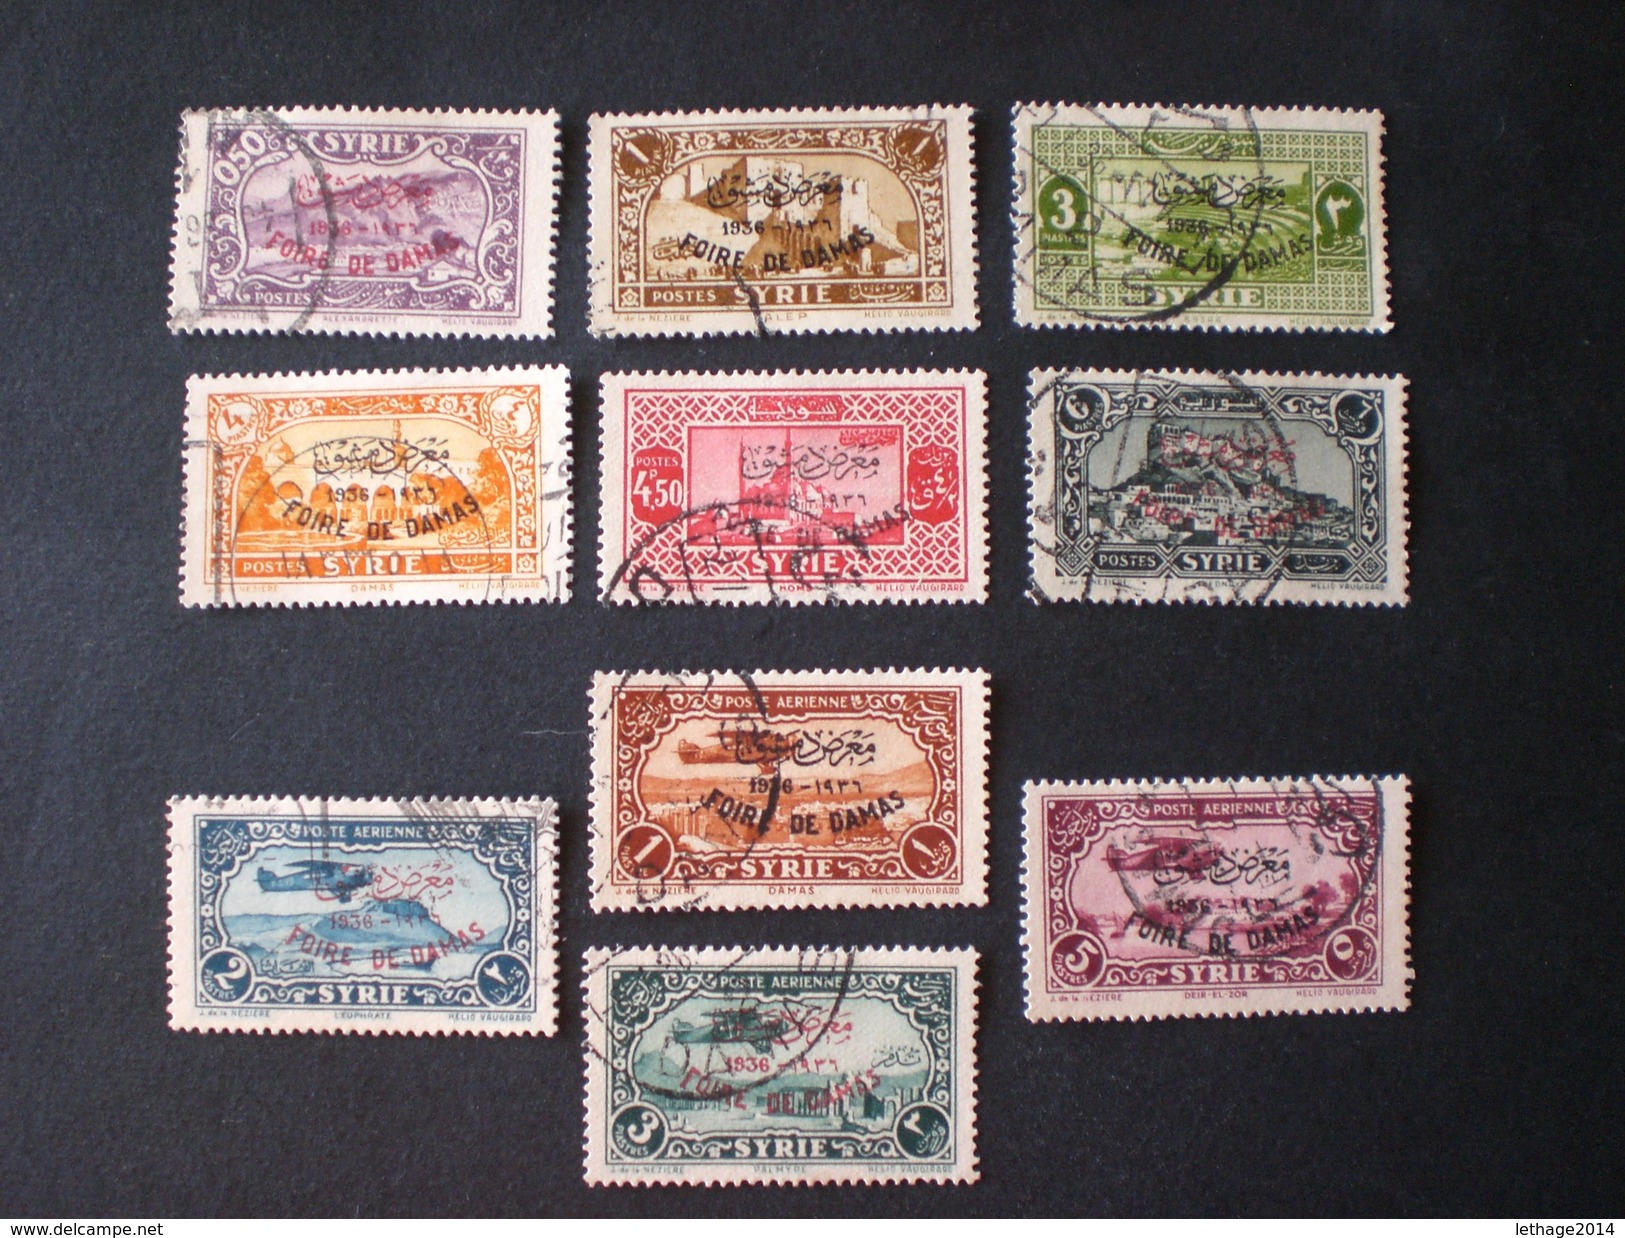 SYRIE SYRIA 1920 French Postage Stamps Surcharged & Overprinted "O.M.F. - Syrie" ++ 54 PHOTO